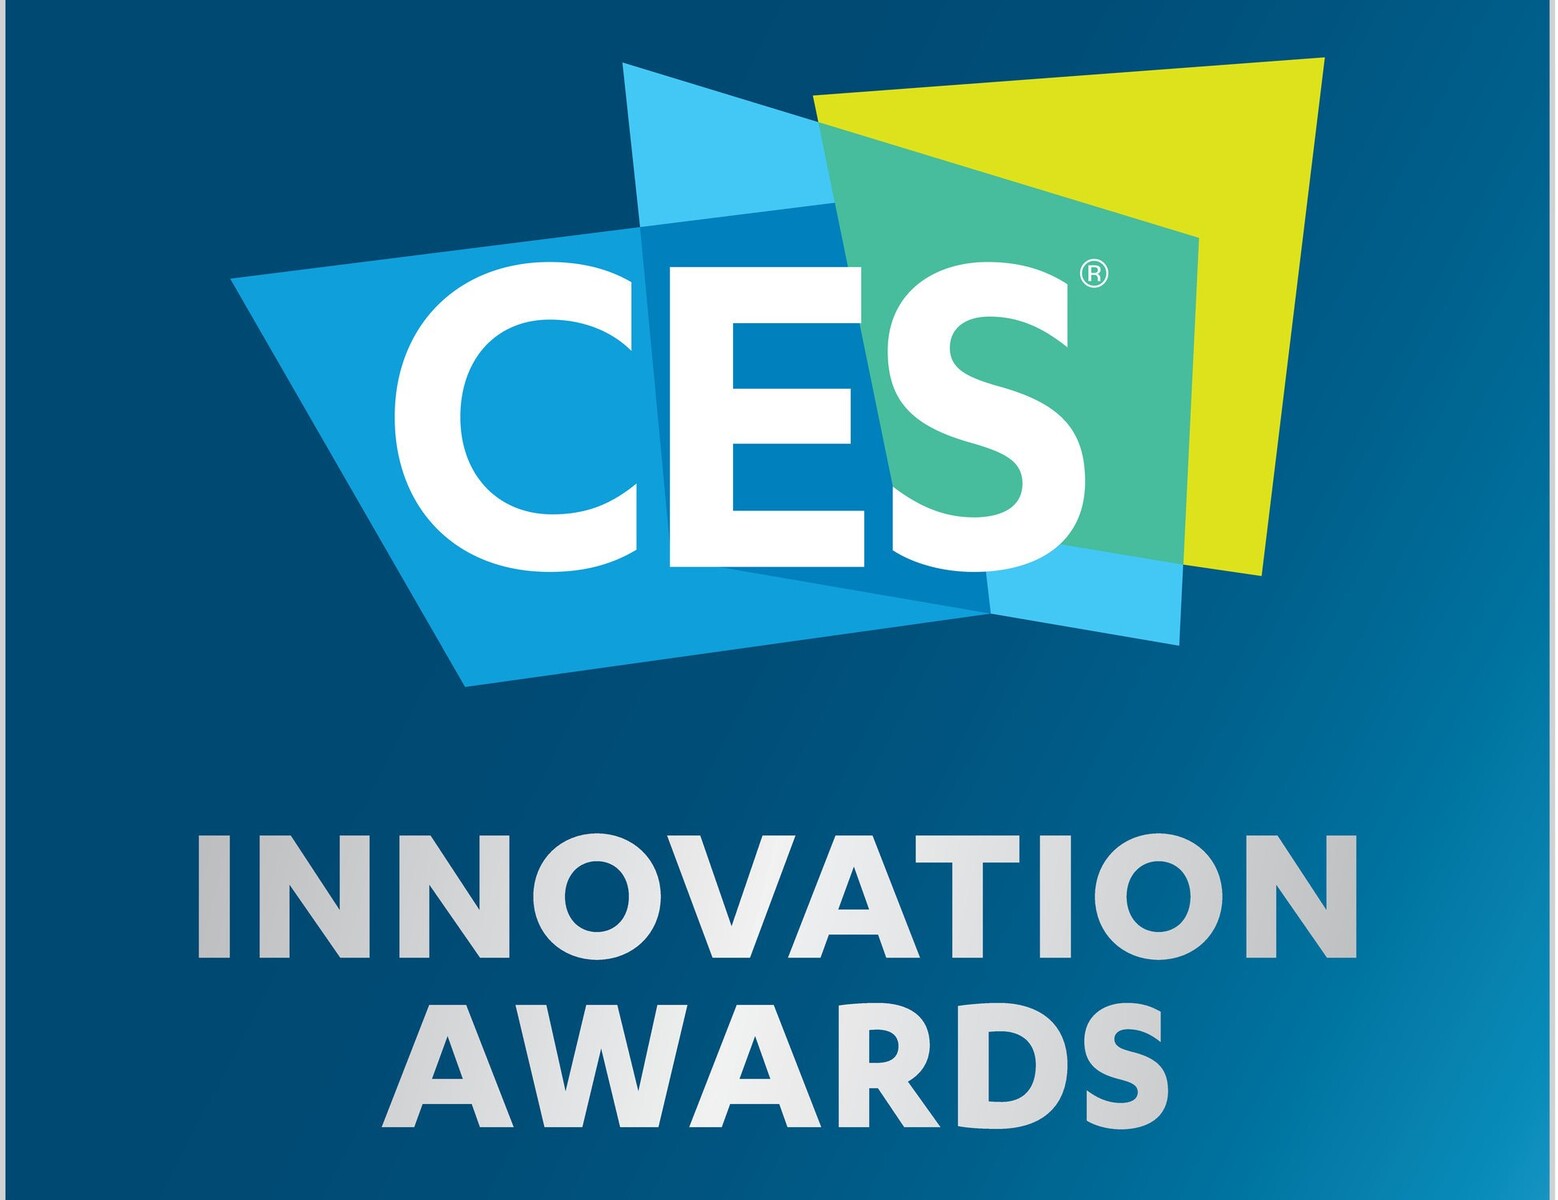 The CTA announces several CES 2020 award winners and honorees early